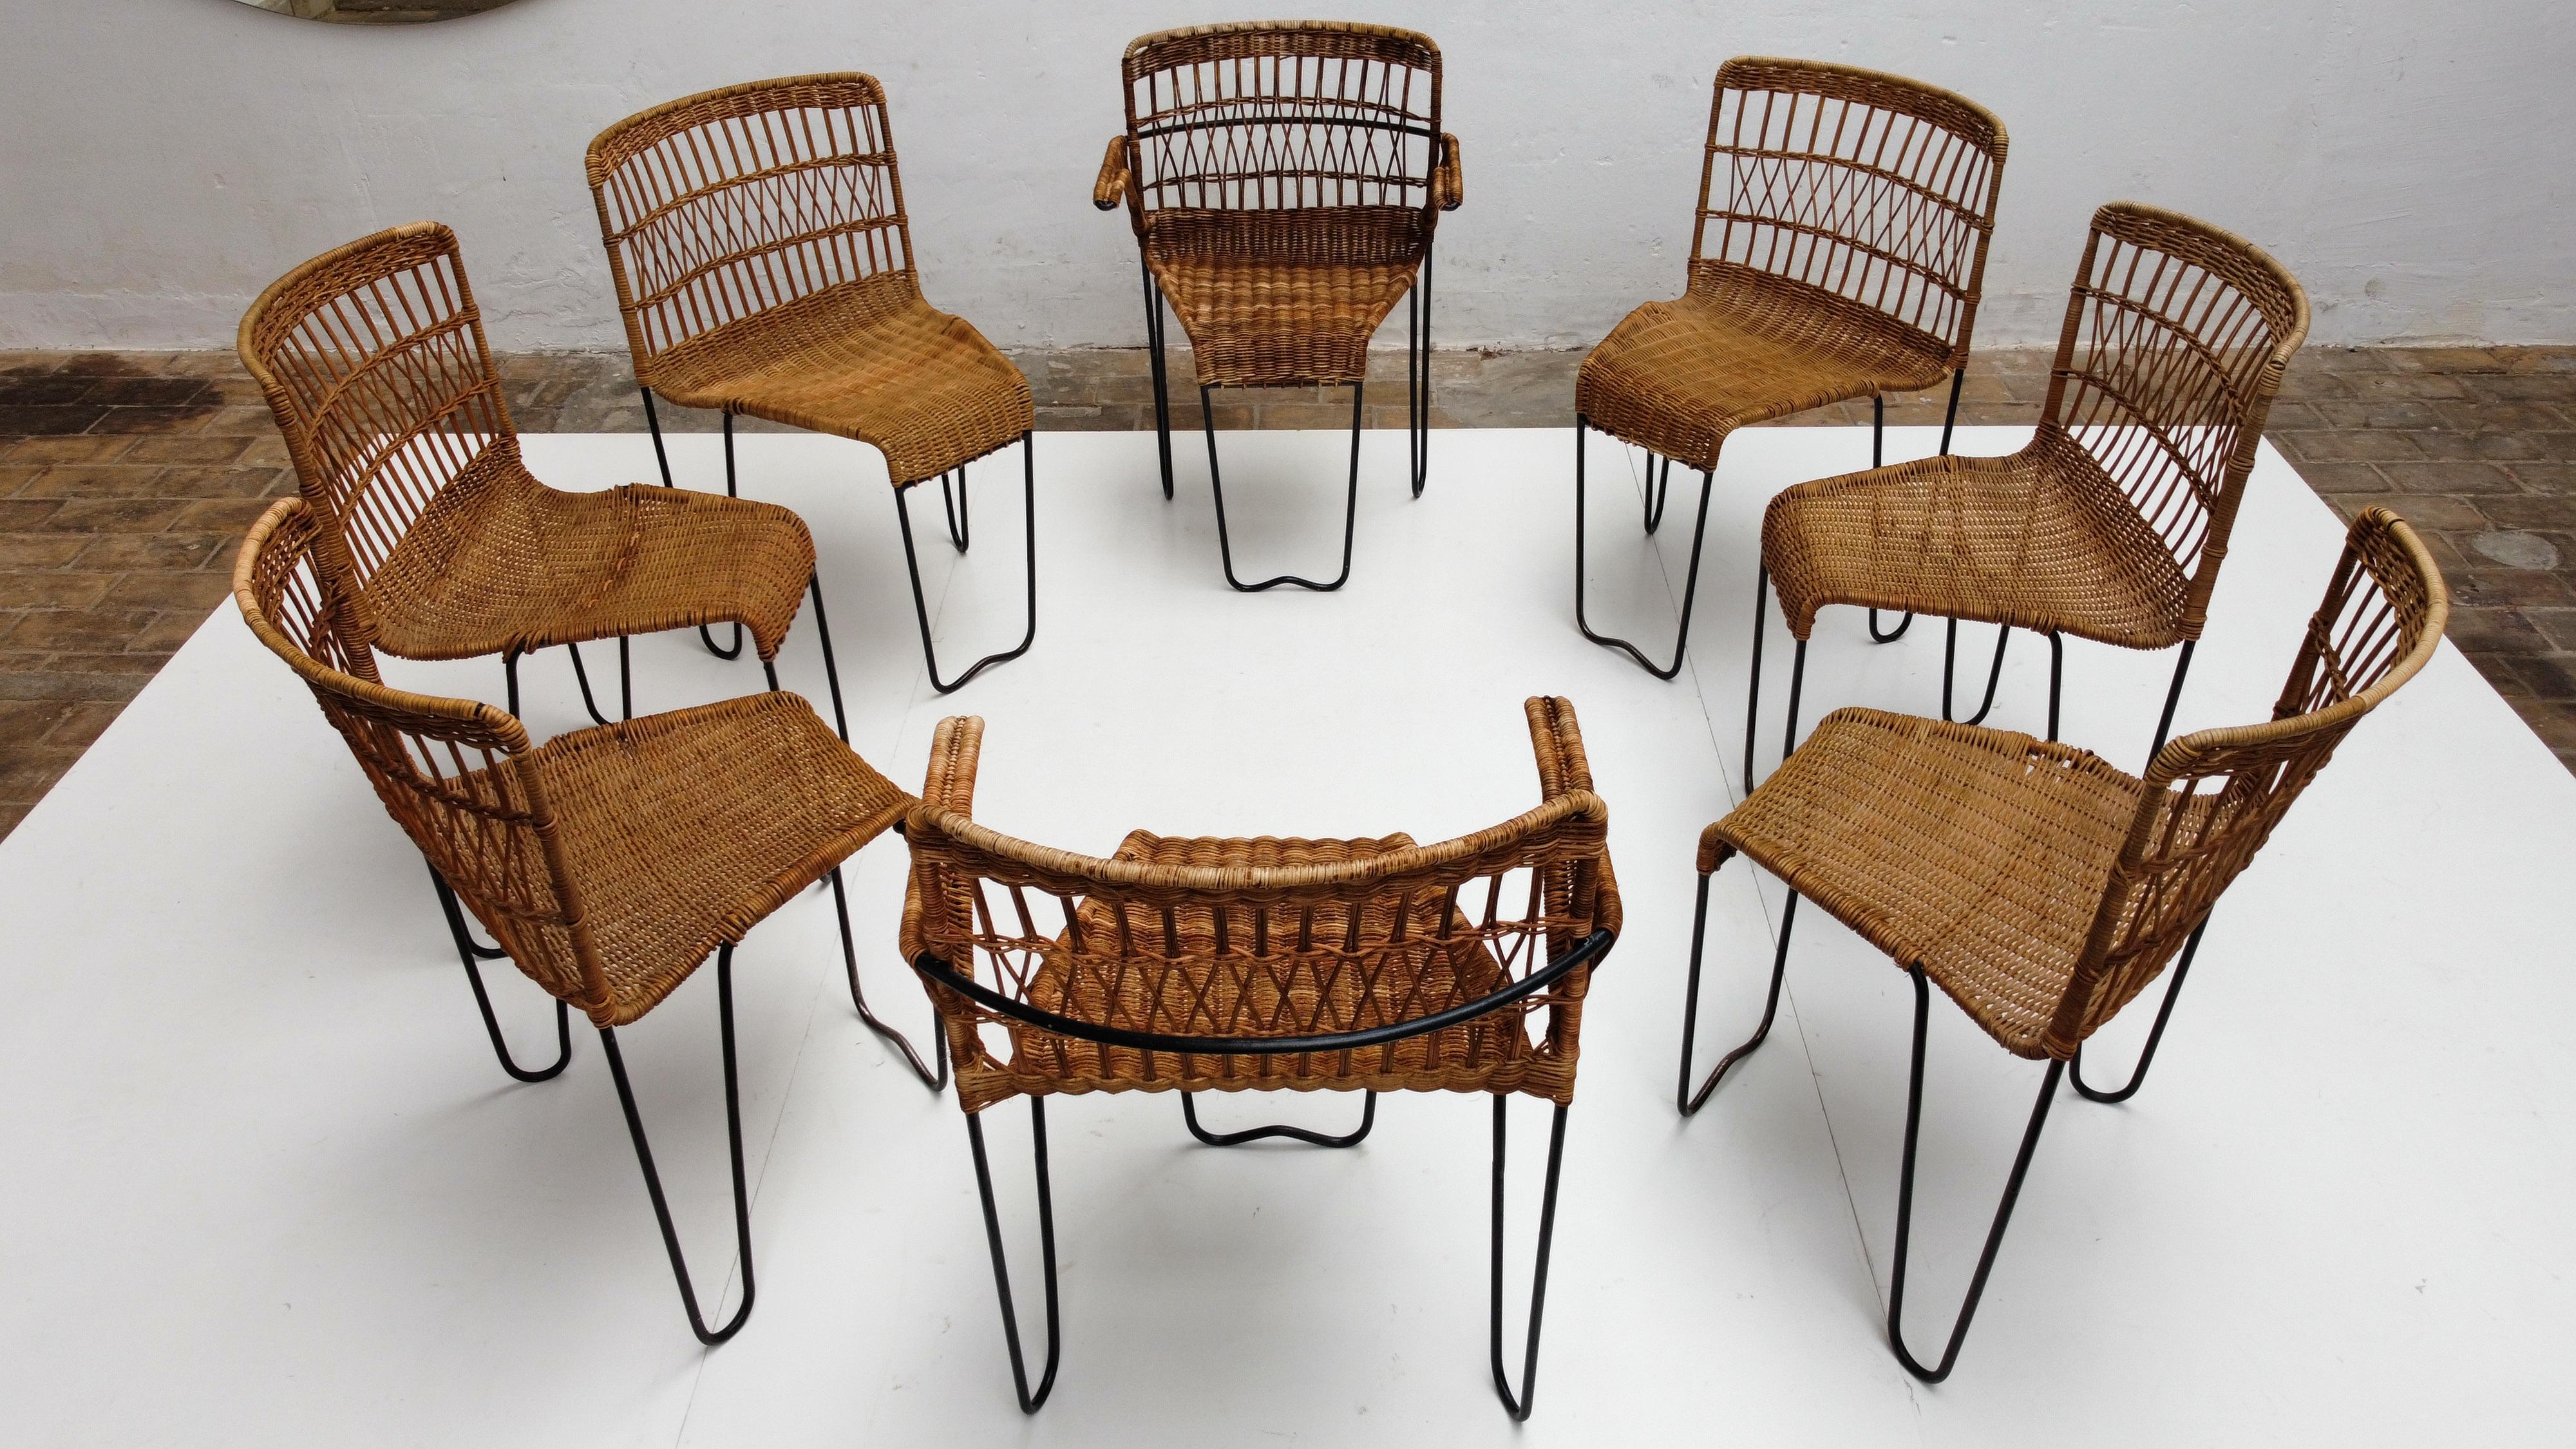 Steel 8 Sculptural Form 'Oro' Dining Chairs by Raoul Guys, 1951, Airborne, France